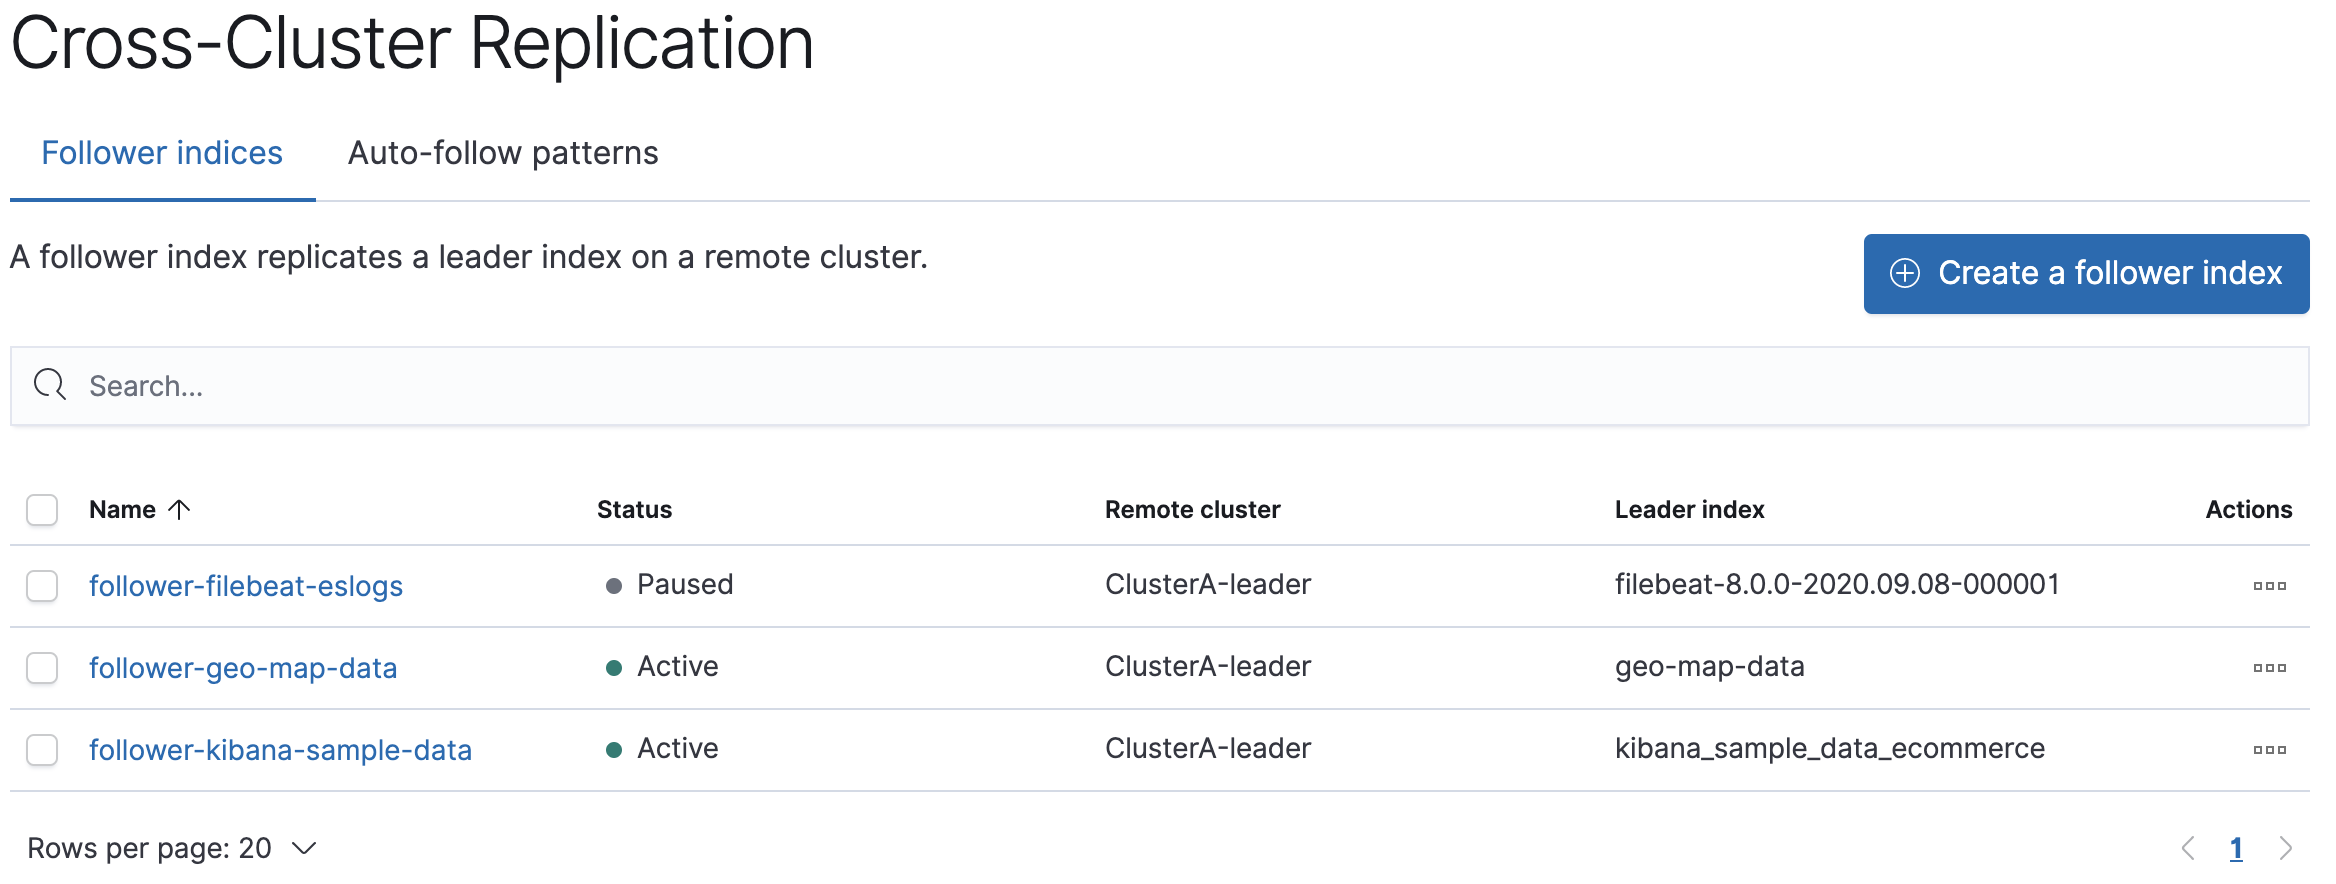 The Cross-Cluster Replication page in Kibana